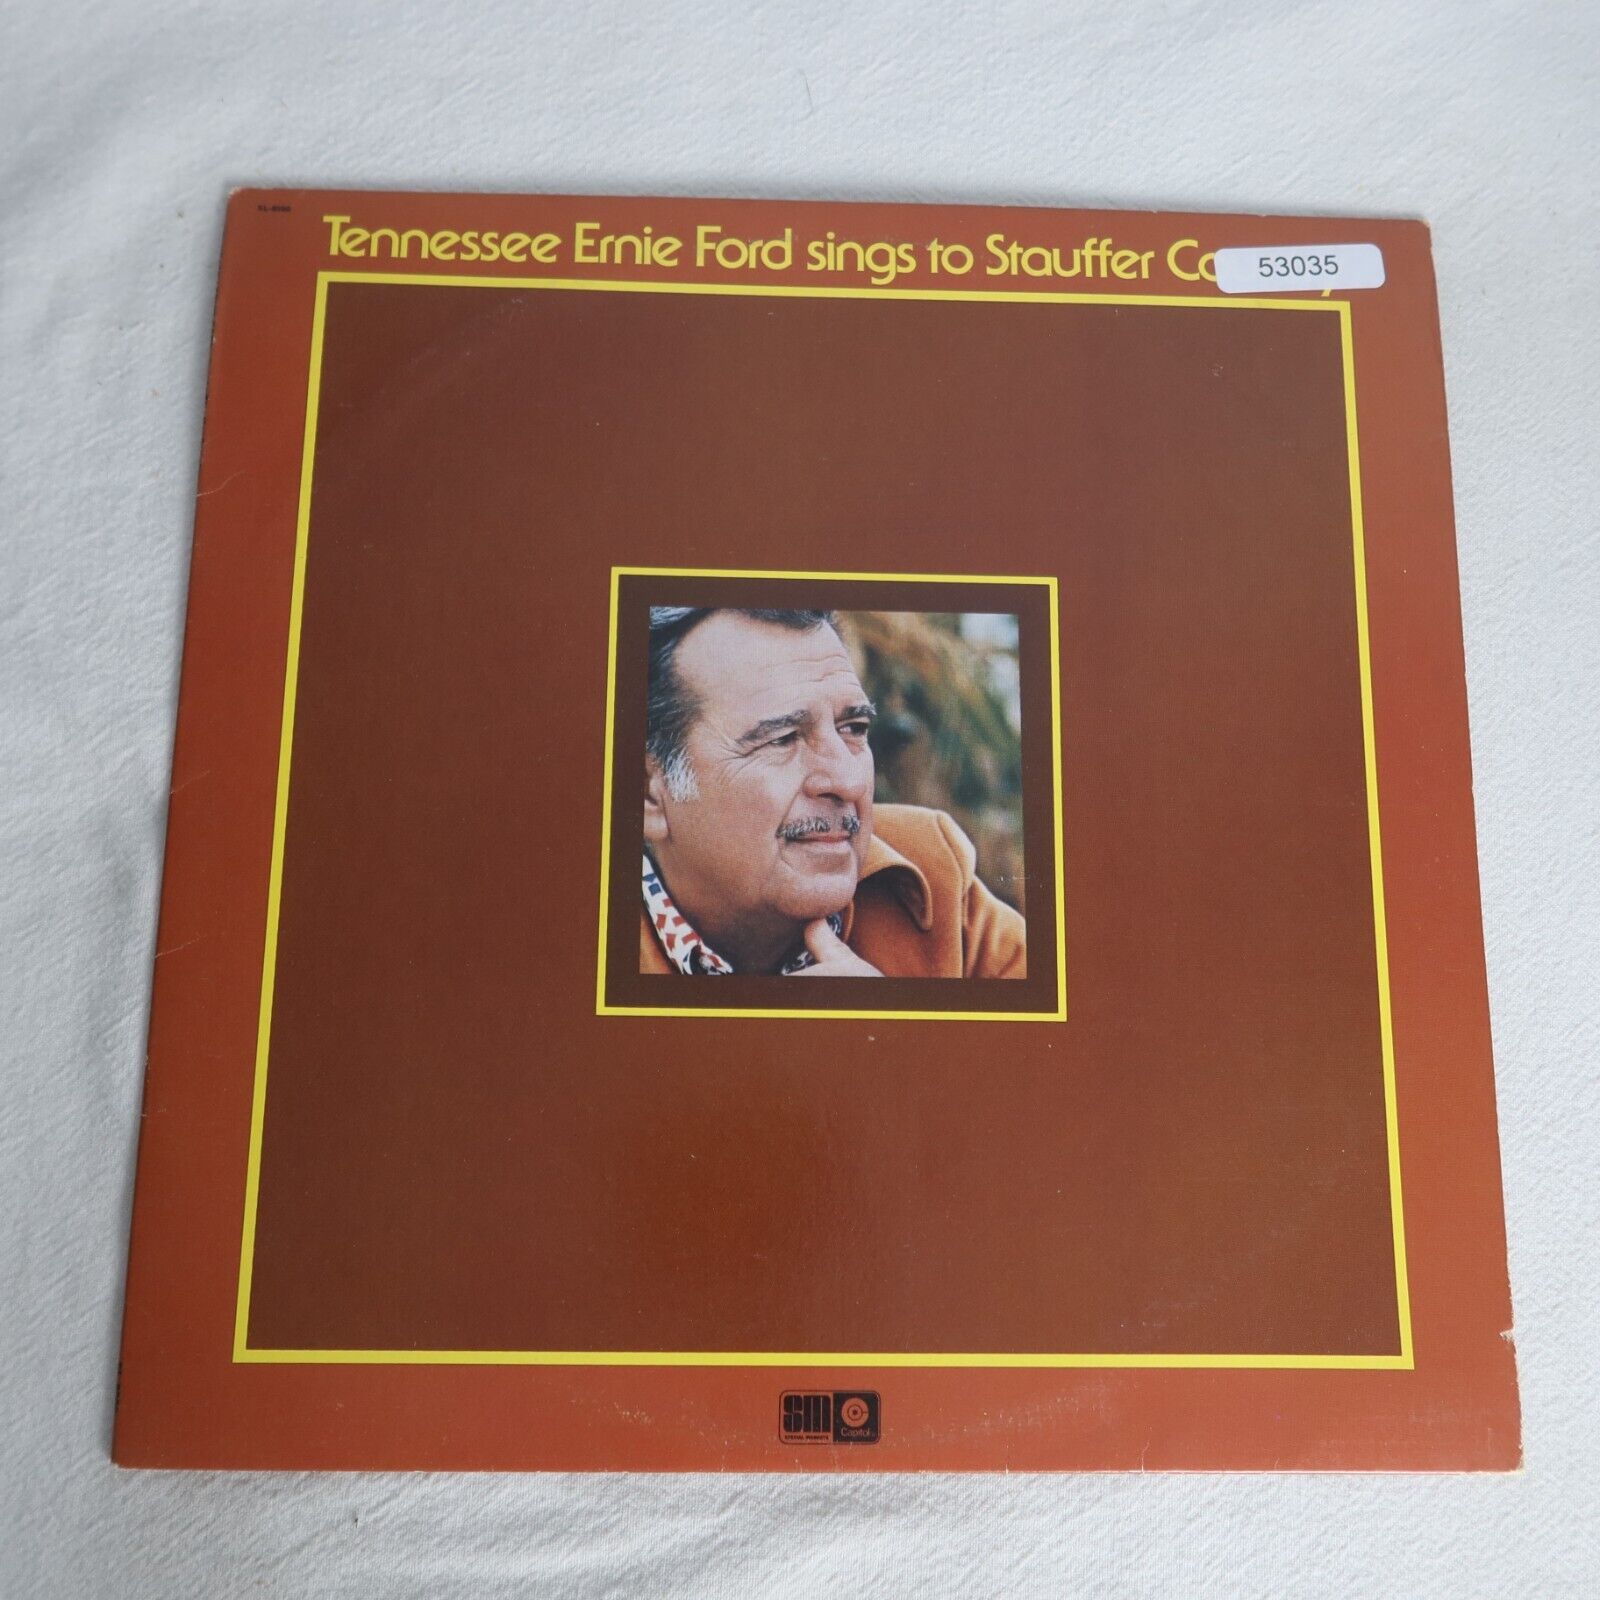 Tennessee Ernie Ford Sings To Stauffer Country LP Vinyl Record Album